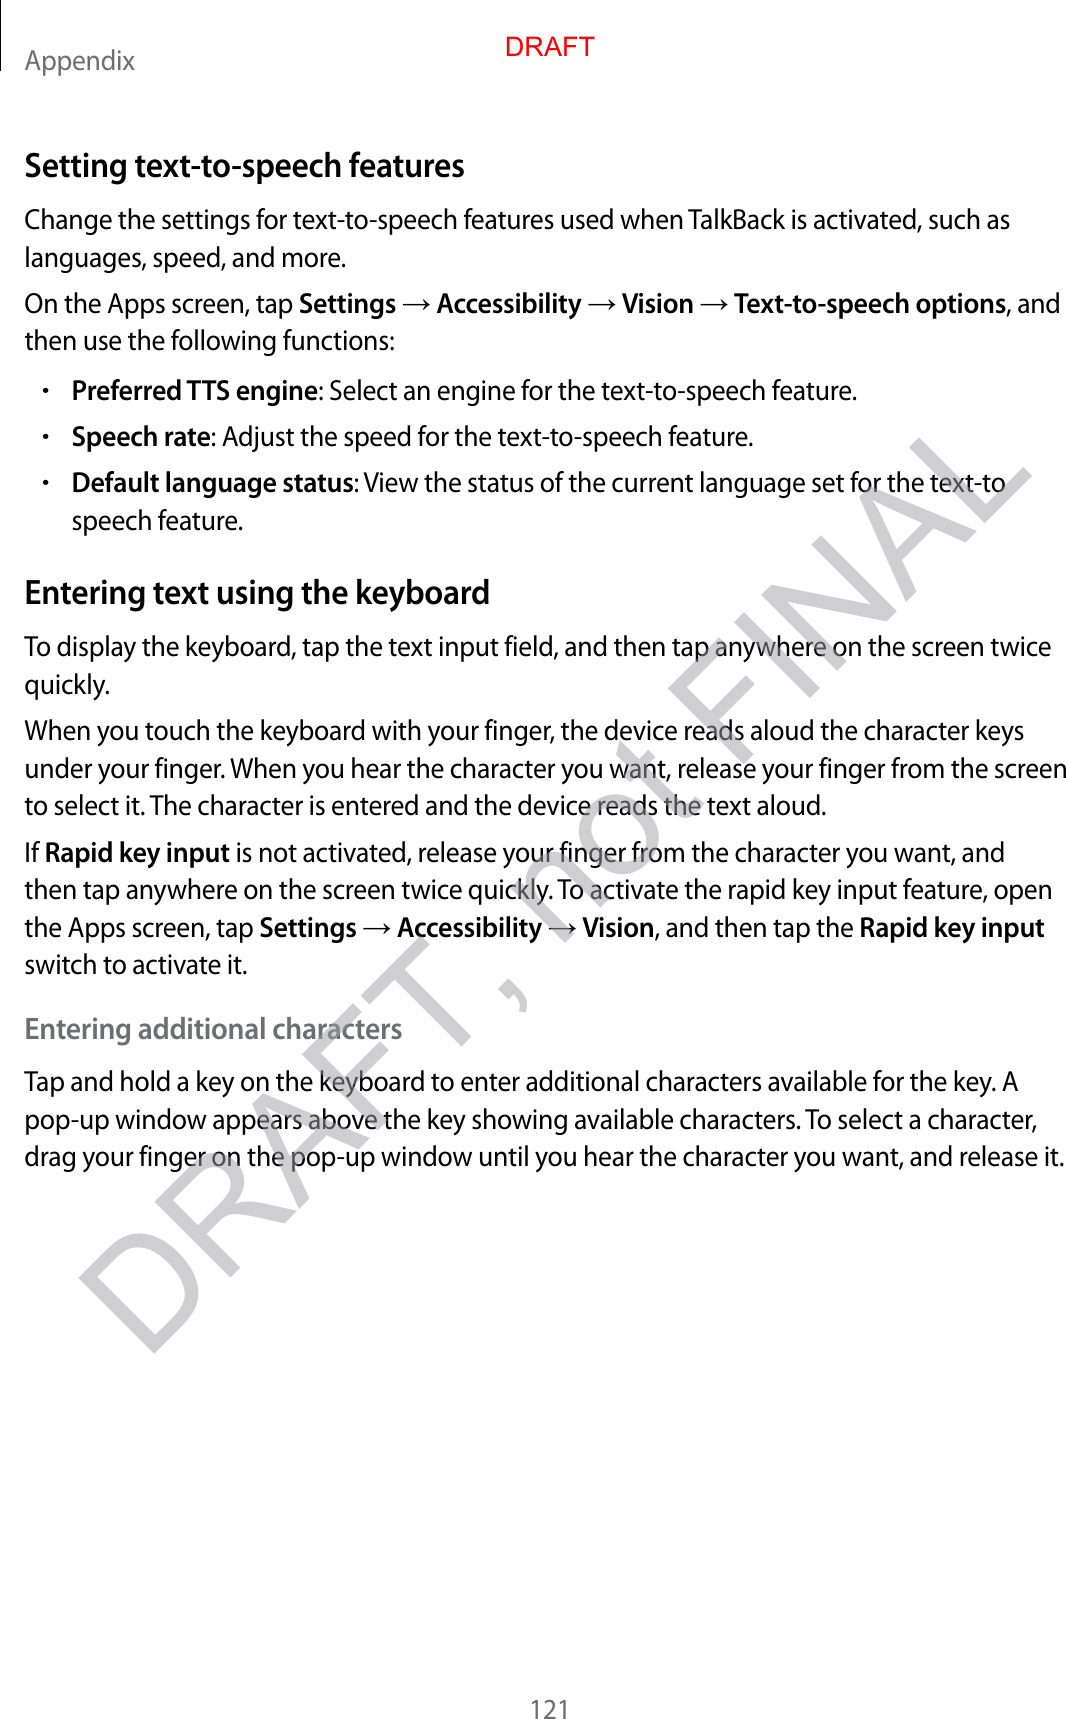 Appendix121Setting text-to-speech featuresChange the settings for text-to-speech features used when TalkBack is activated, such as languages, speed, and more.On the Apps screen, tap Settings  Accessibility  Vision  Text-to-speech options, and then use the following functions:•Preferred TTS engine: Select an engine for the text-to-speech feature.•Speech rate: Adjust the speed for the text-to-speech feature.•Default language status: View the status of the current language set for the text-to speech feature.Entering text using the keyboardTo display the keyboard, tap the text input field, and then tap anywhere on the screen twice quickly.When you touch the keyboard with your finger, the device reads aloud the character keys under your finger. When you hear the character you want, release your finger from the screen to select it. The character is entered and the device reads the text aloud.If Rapid key input is not activated, release your finger from the character you want, and then tap anywhere on the screen twice quickly. To activate the rapid key input feature, open the Apps screen, tap Settings  Accessibility  Vision, and then tap the Rapid key input switch to activate it.Entering additional charactersTap and hold a key on the keyboard to enter additional characters available for the key. A pop-up window appears above the key showing available characters. To select a character, drag your finger on the pop-up window until you hear the character you want, and release it.DRAFTDRAFT, not FINAL